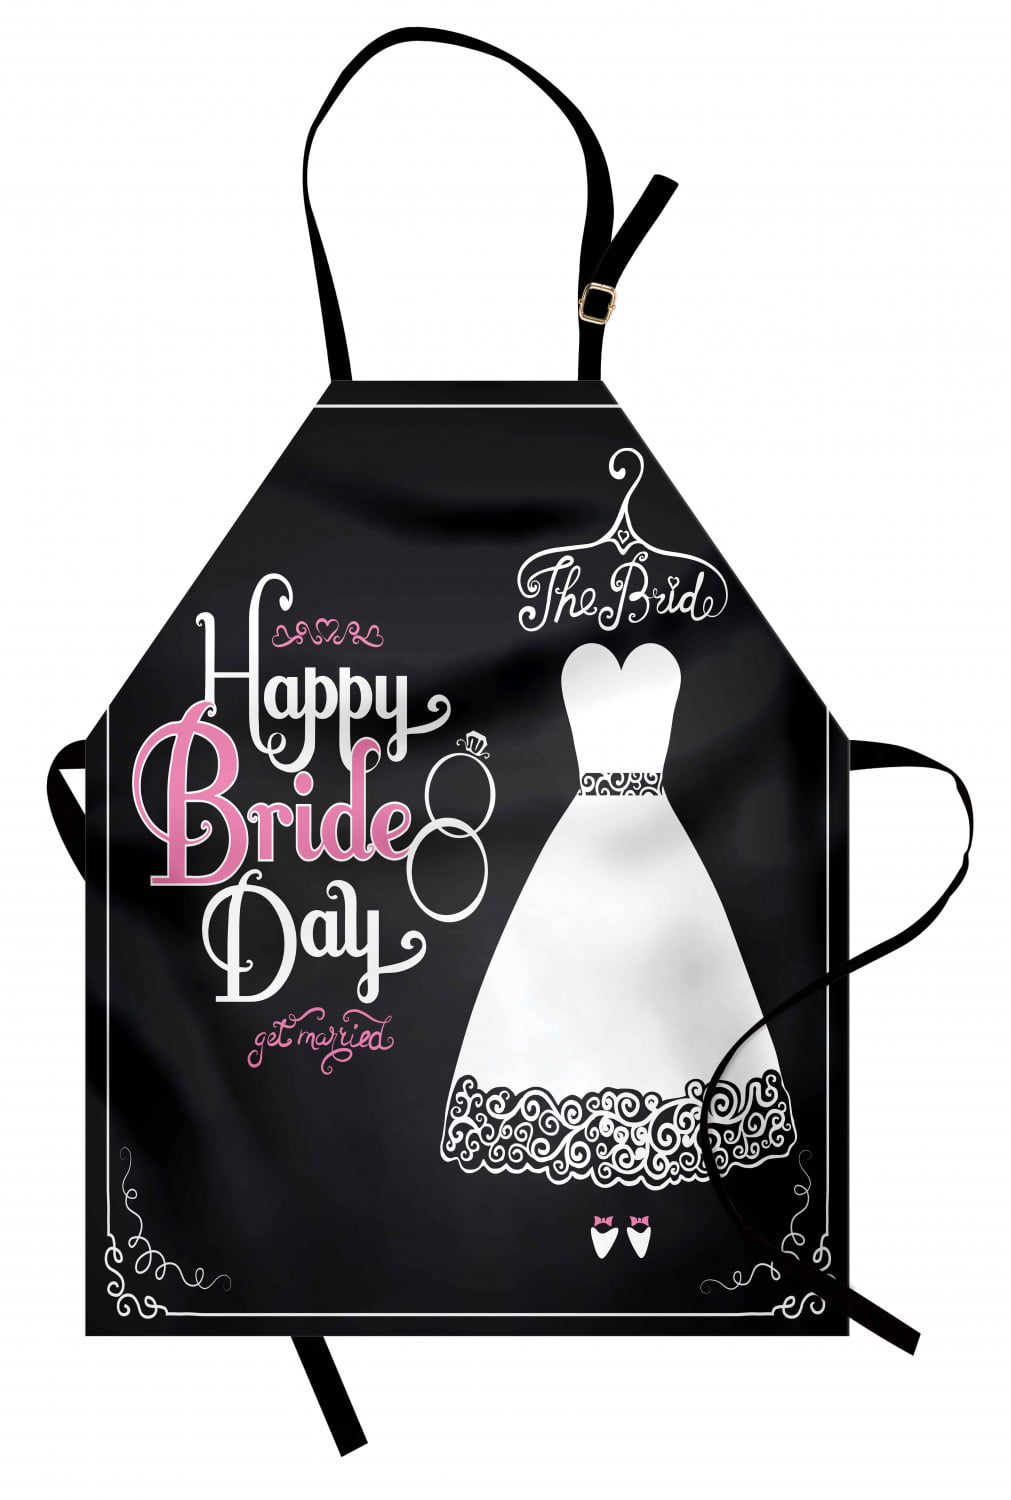 Everyday Use Adult Baking Apron Bride to Be Adjustable Neck Strap Bib Apron w 2 pockets Washable Reusable Great for Cooking